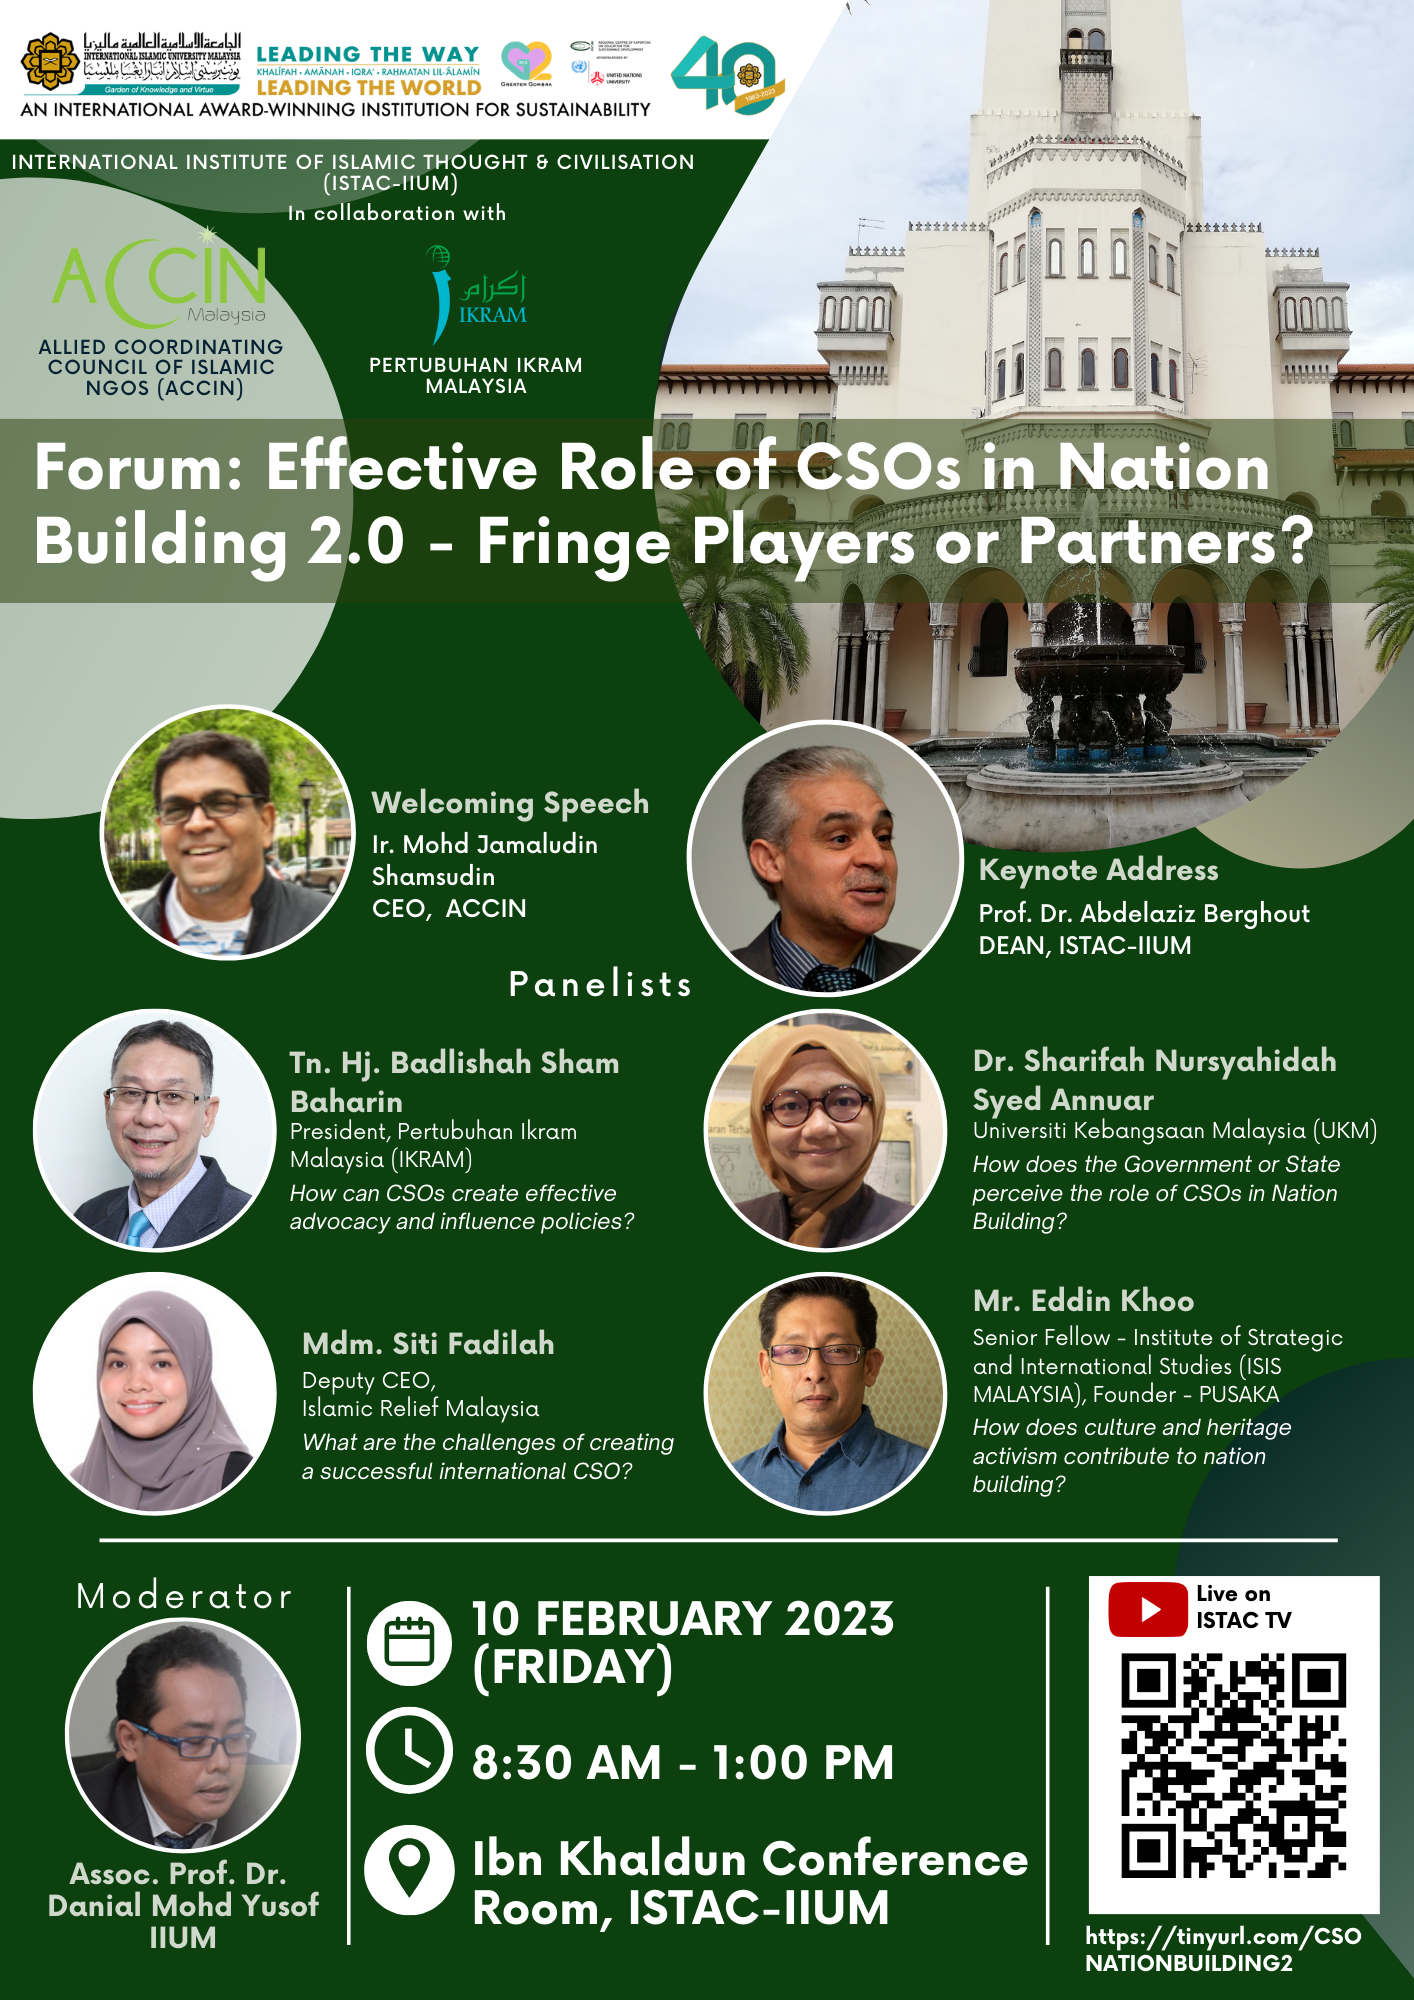 Forum: Effective Role of CSOs in Nation Building 2.0 - Fringe Players or Partners?